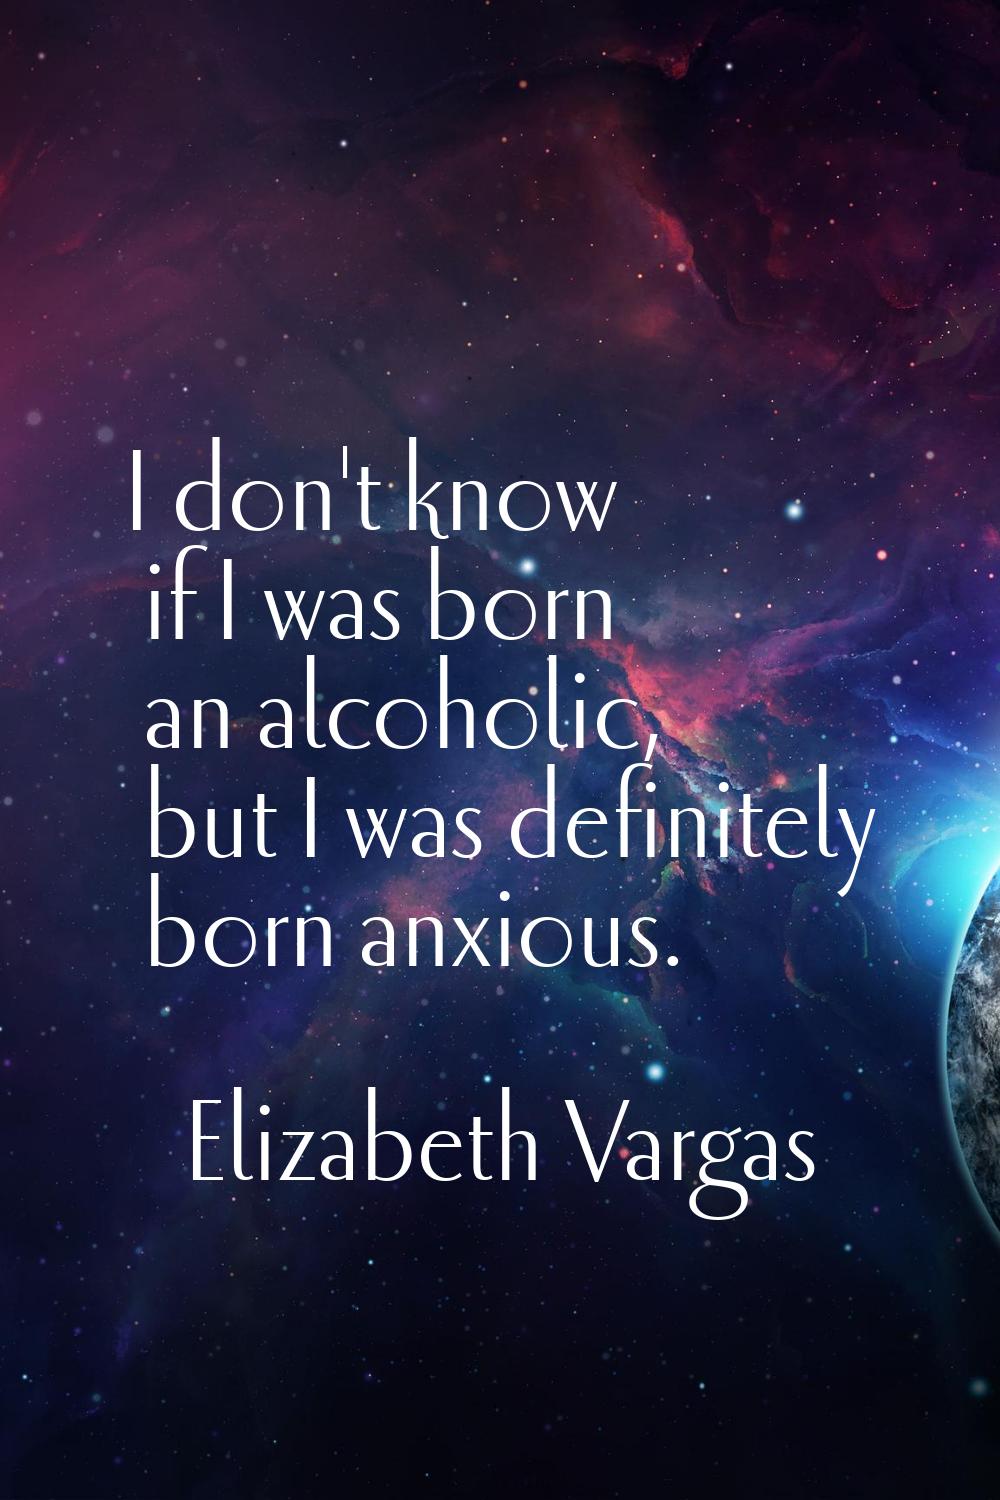 I don't know if I was born an alcoholic, but I was definitely born anxious.